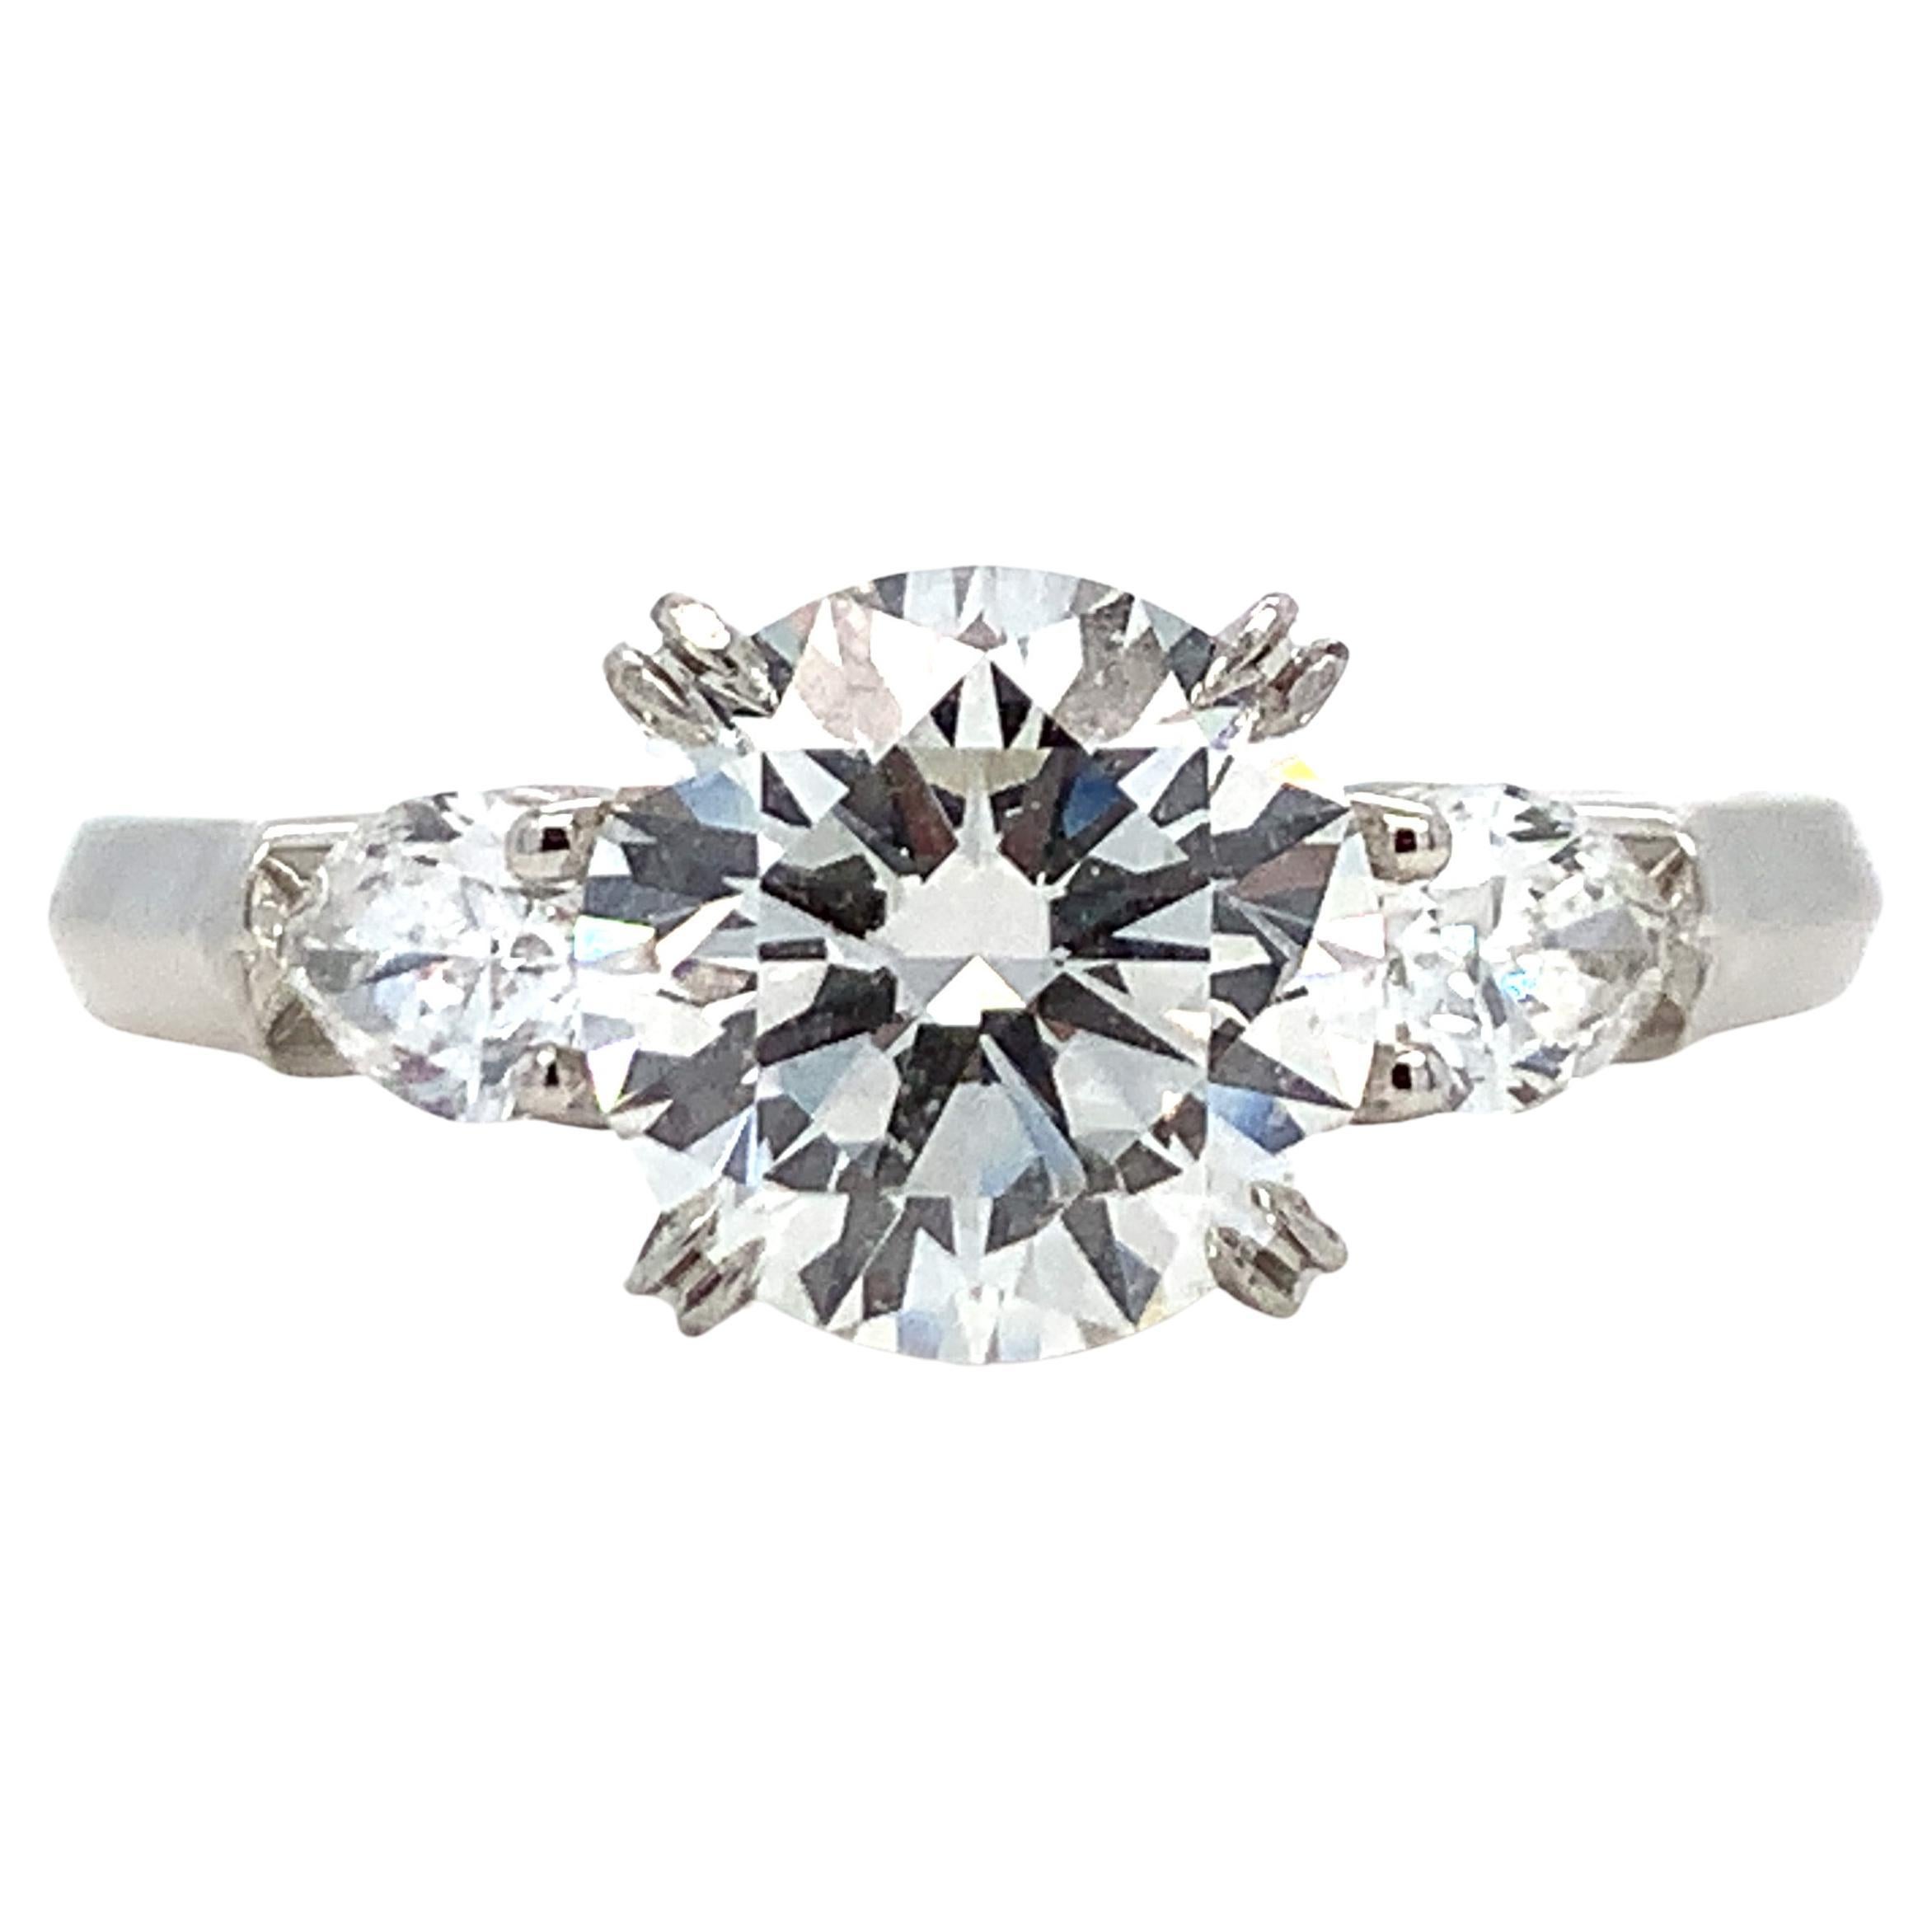 This three stone Harry Winston diamond engagement ring is crafted from platinum. It features three natural diamonds. The center diamond is GIA certified. It's 1.60 carat, color F, and clarity VS1. Each pear diamond is approximately 0.20 Ct, clarity